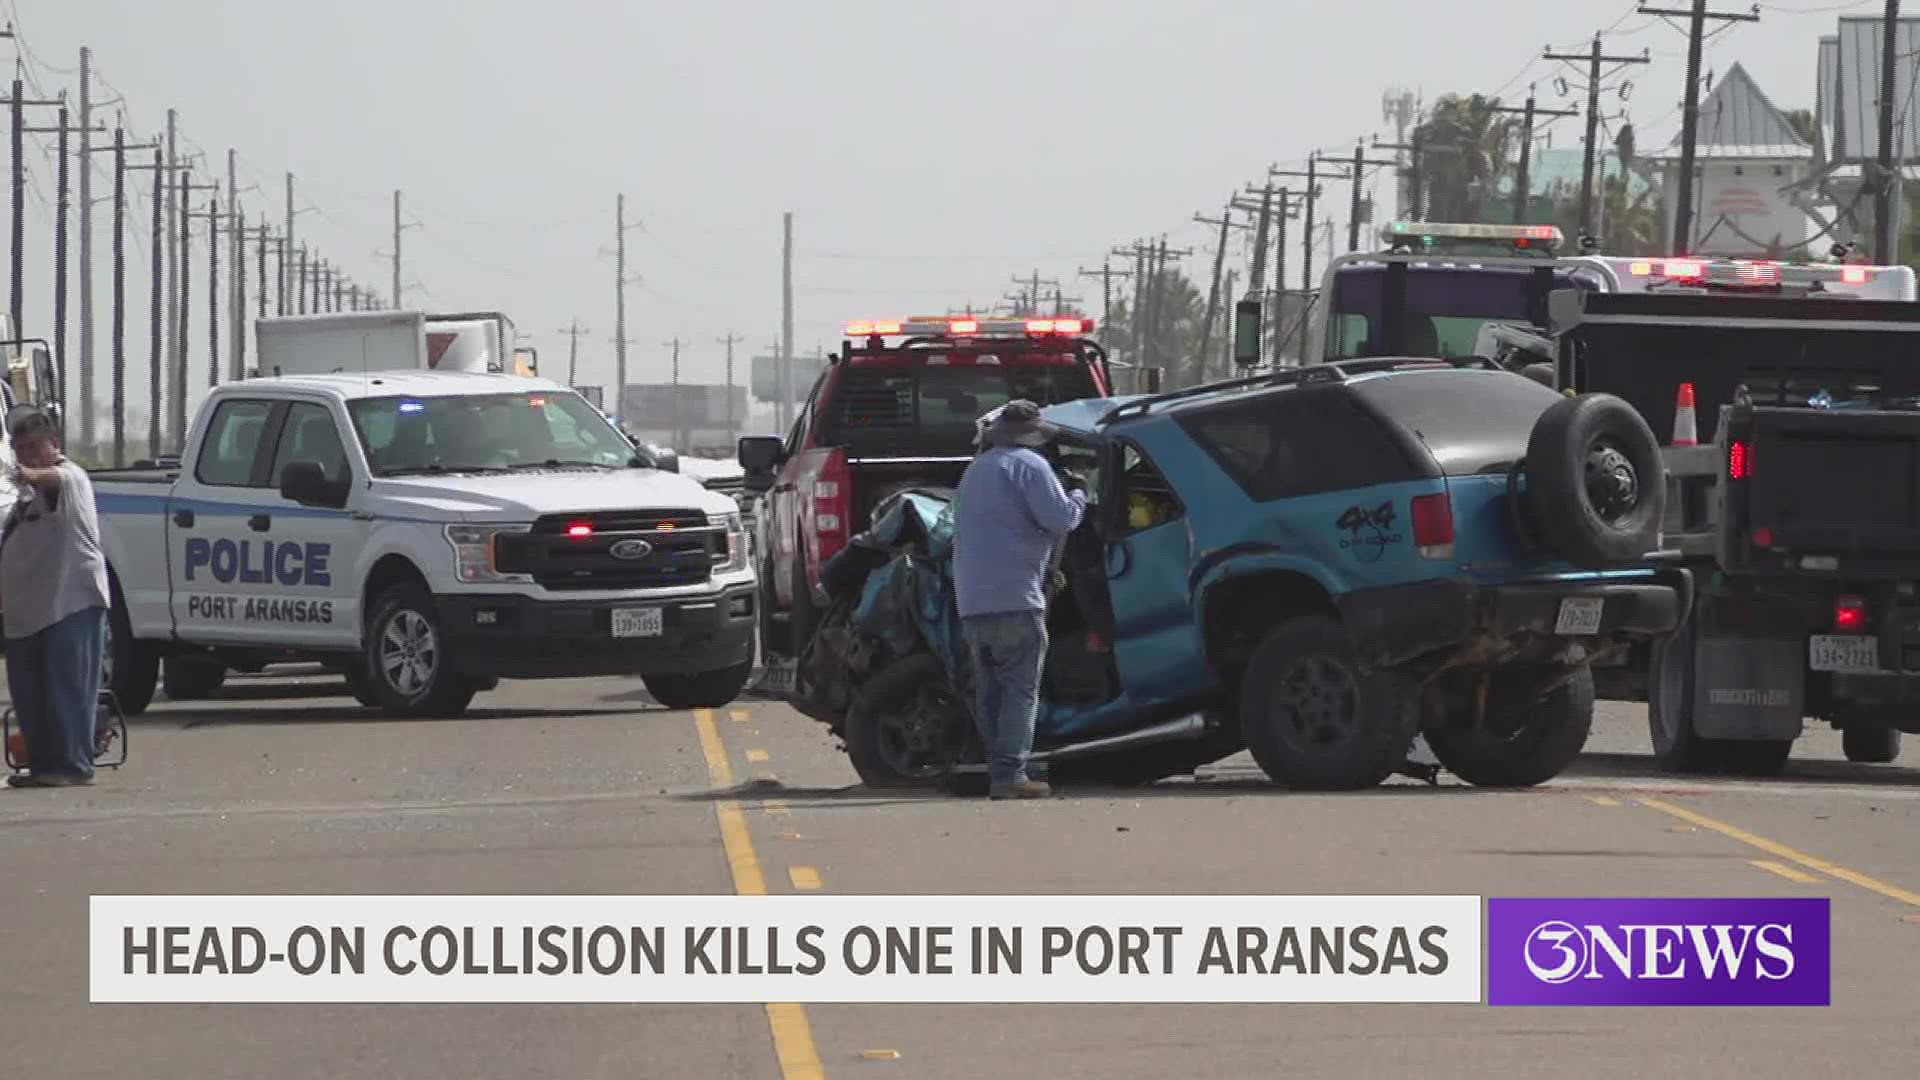 Port Aransas police say the crash happened when the driver of a blue SUV swerved into the oncoming lane and hit a truck head-on.